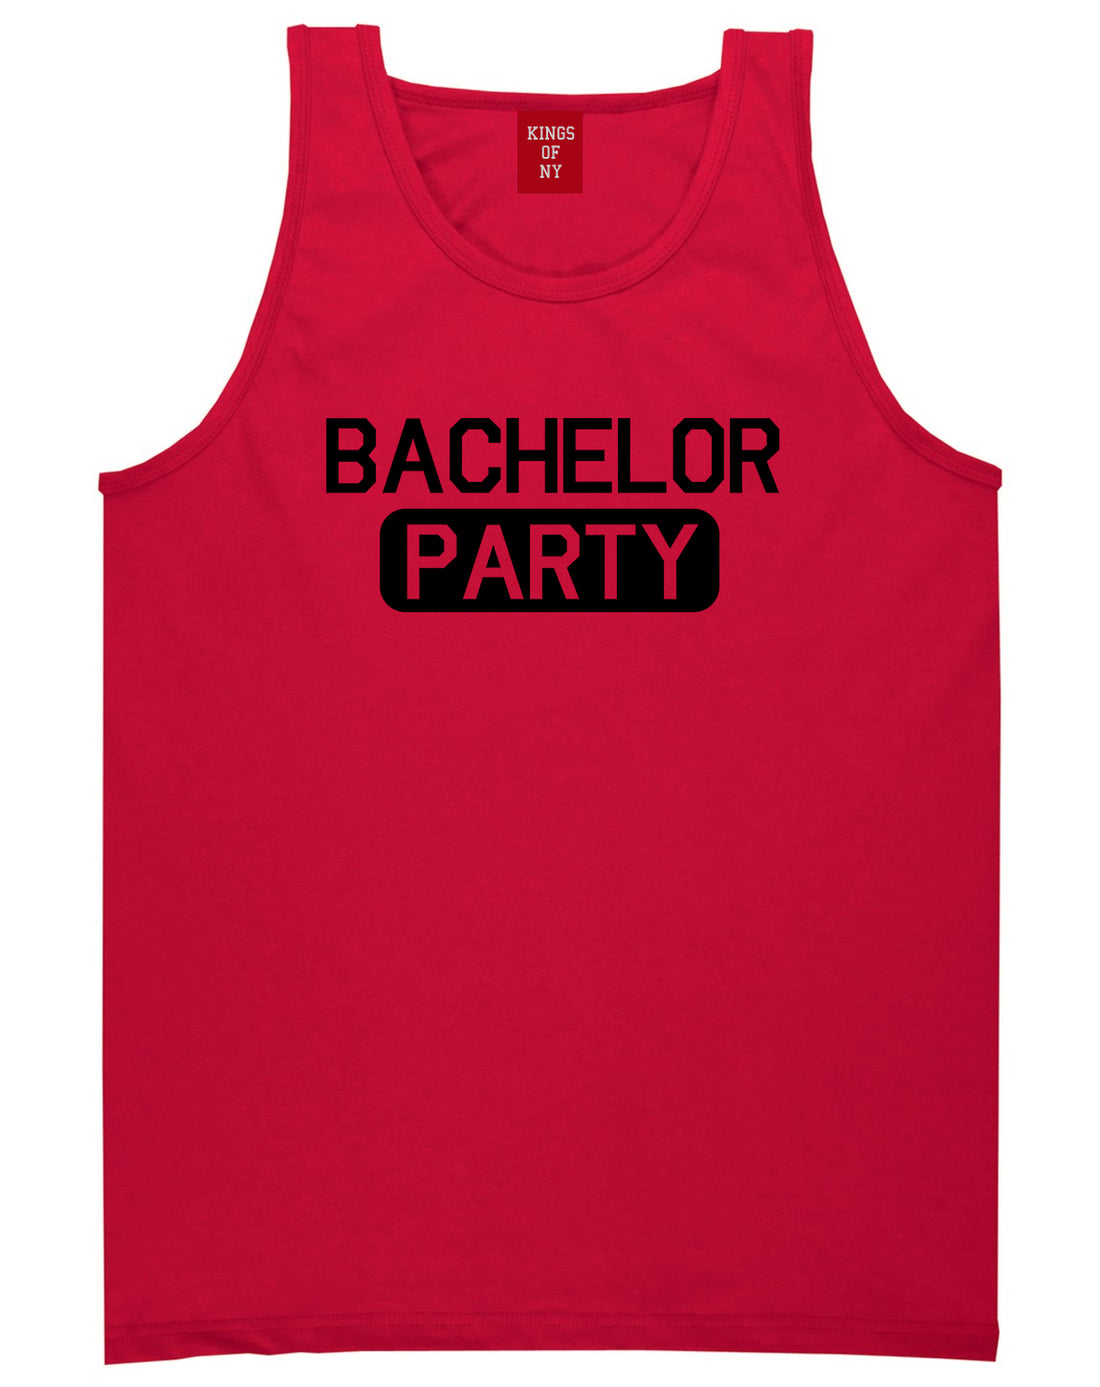 Bachelor Party Red Tank Top Shirt by Kings Of NY